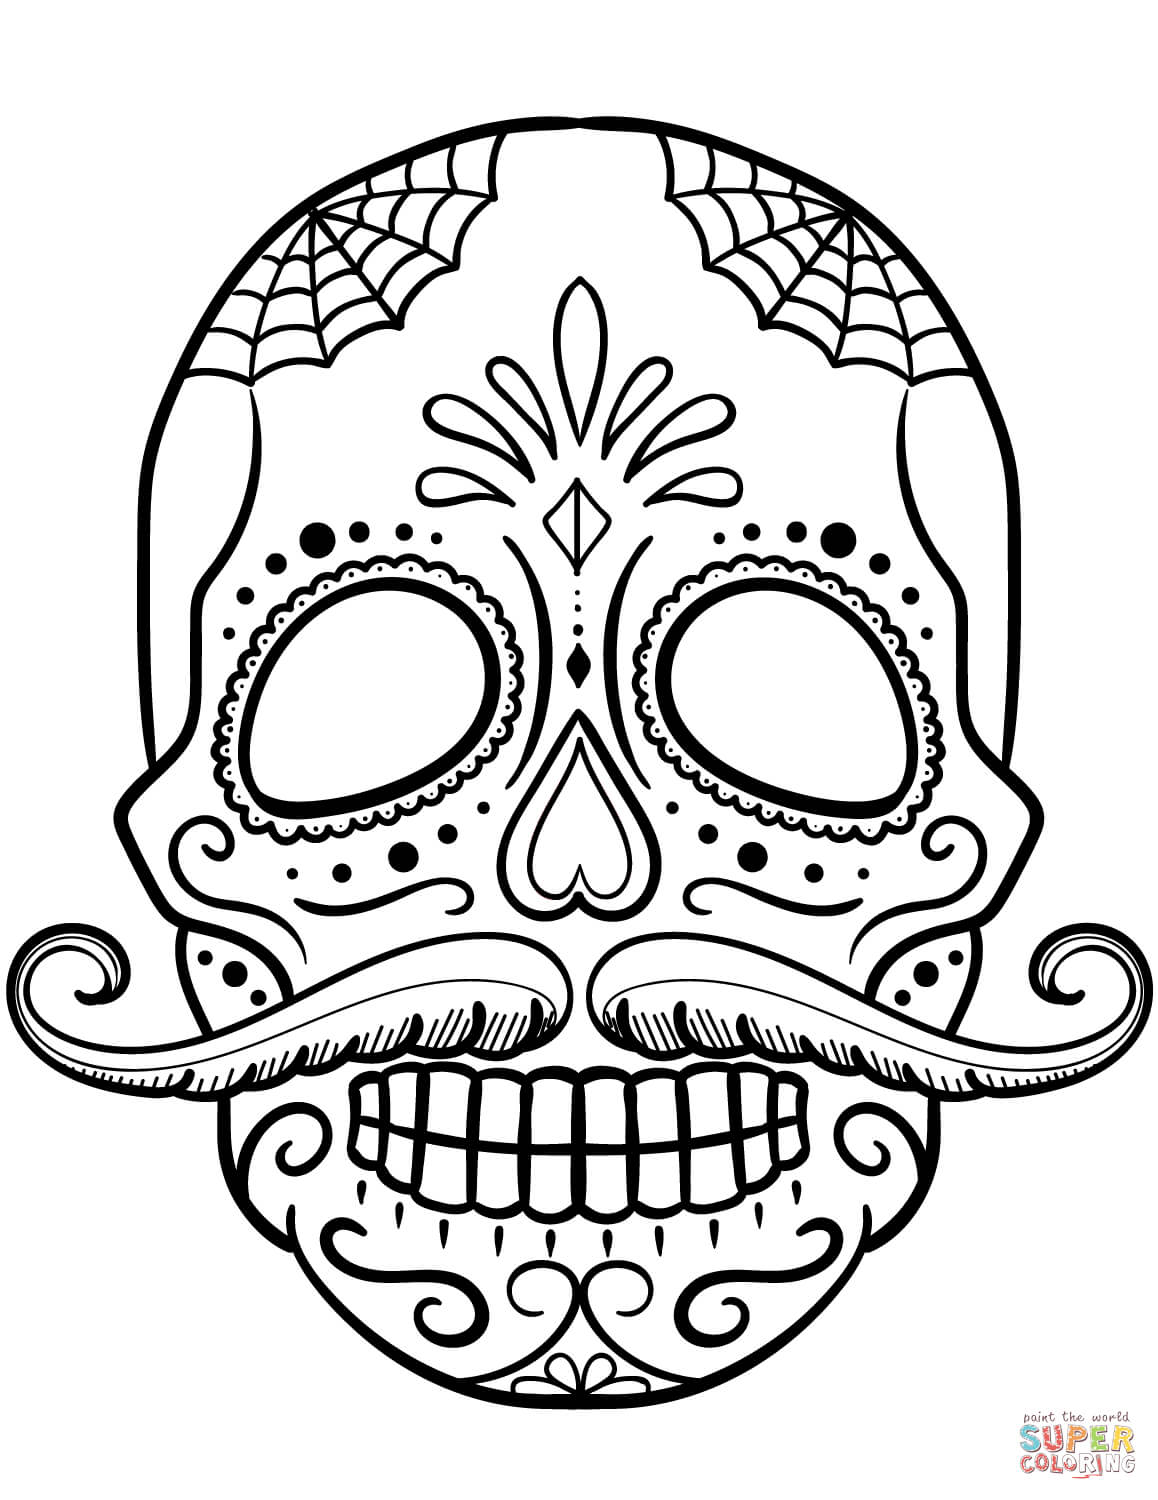 Sugar Skull With Mustache Coloring Page From Sugar Skulls Throughout Blank Sugar Skull Template